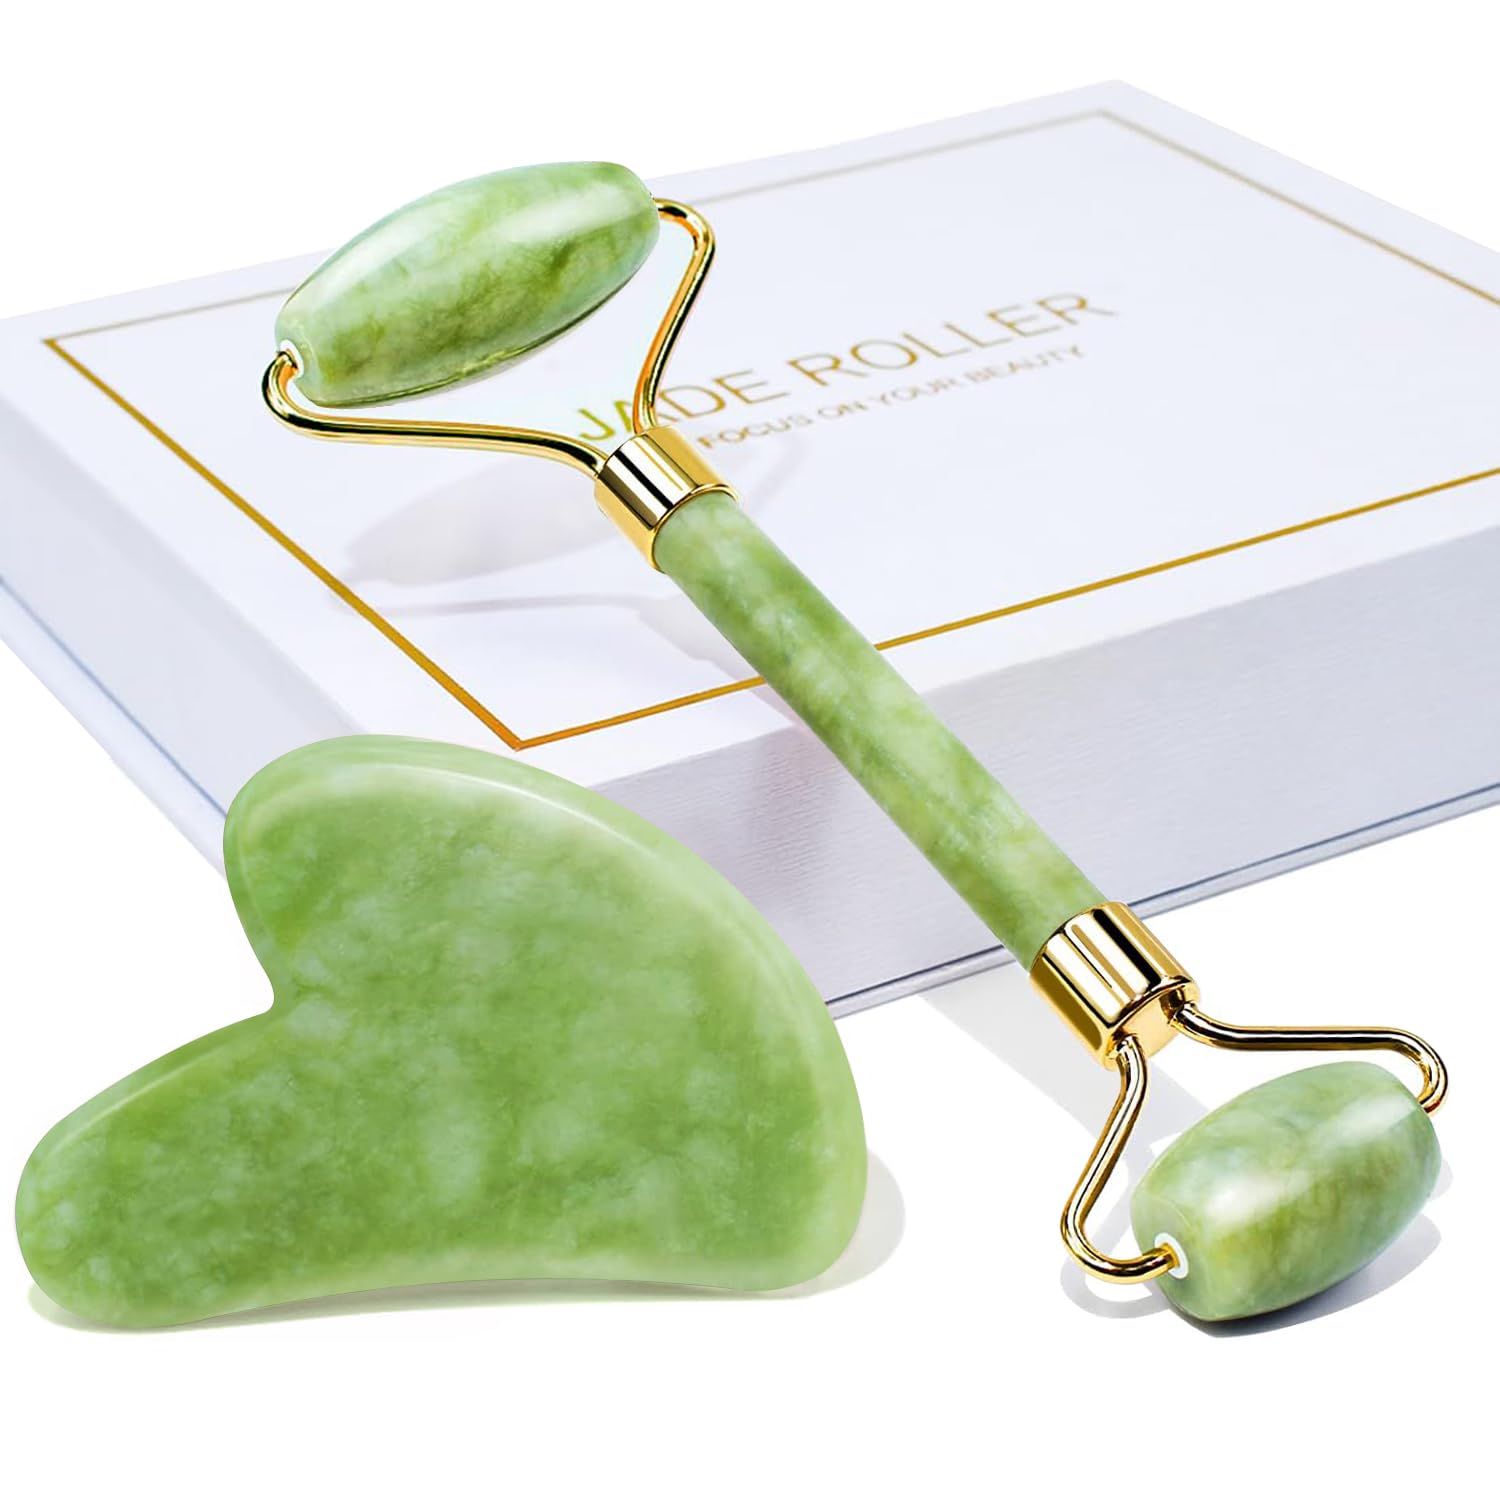 BAIMEI Gua Sha  Jade Roller Facial Tools Face Roller and Gua Sha Set for Skin Care Routine and Puffiness, Self Care Gift for Men Women - Green